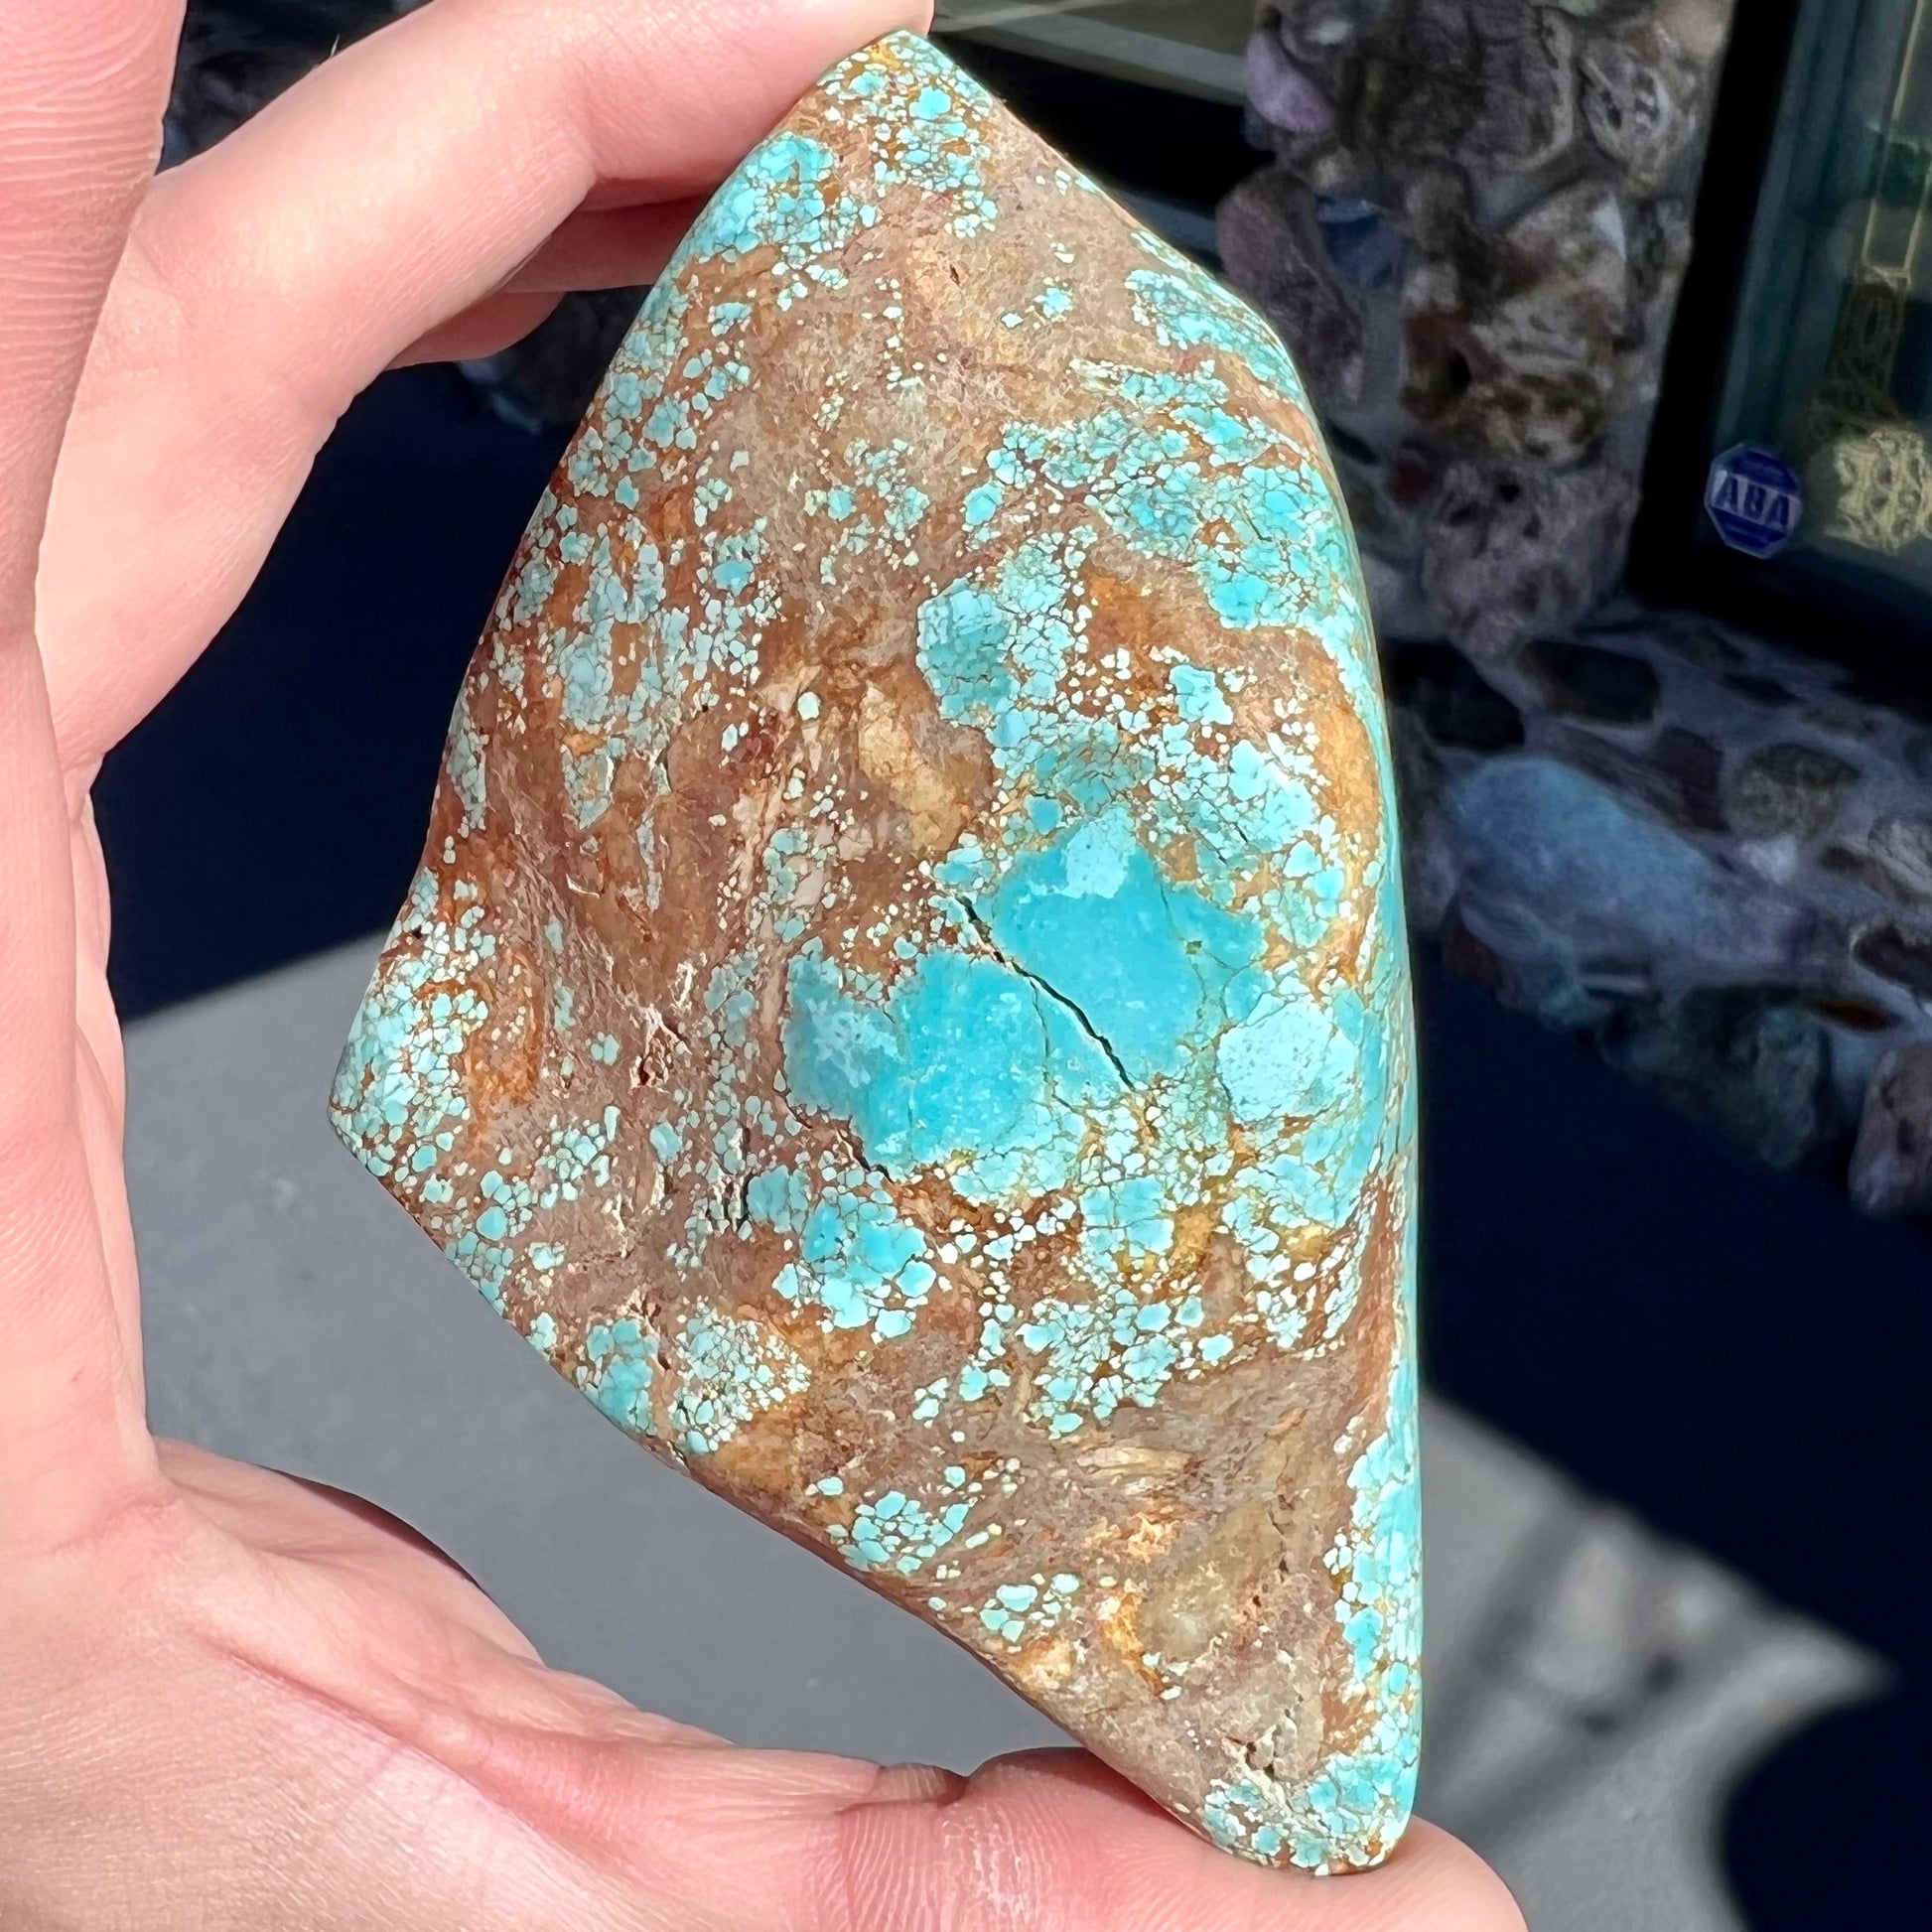 A polished Cripple Creek turquoise specimen from Teller County, Colorado.